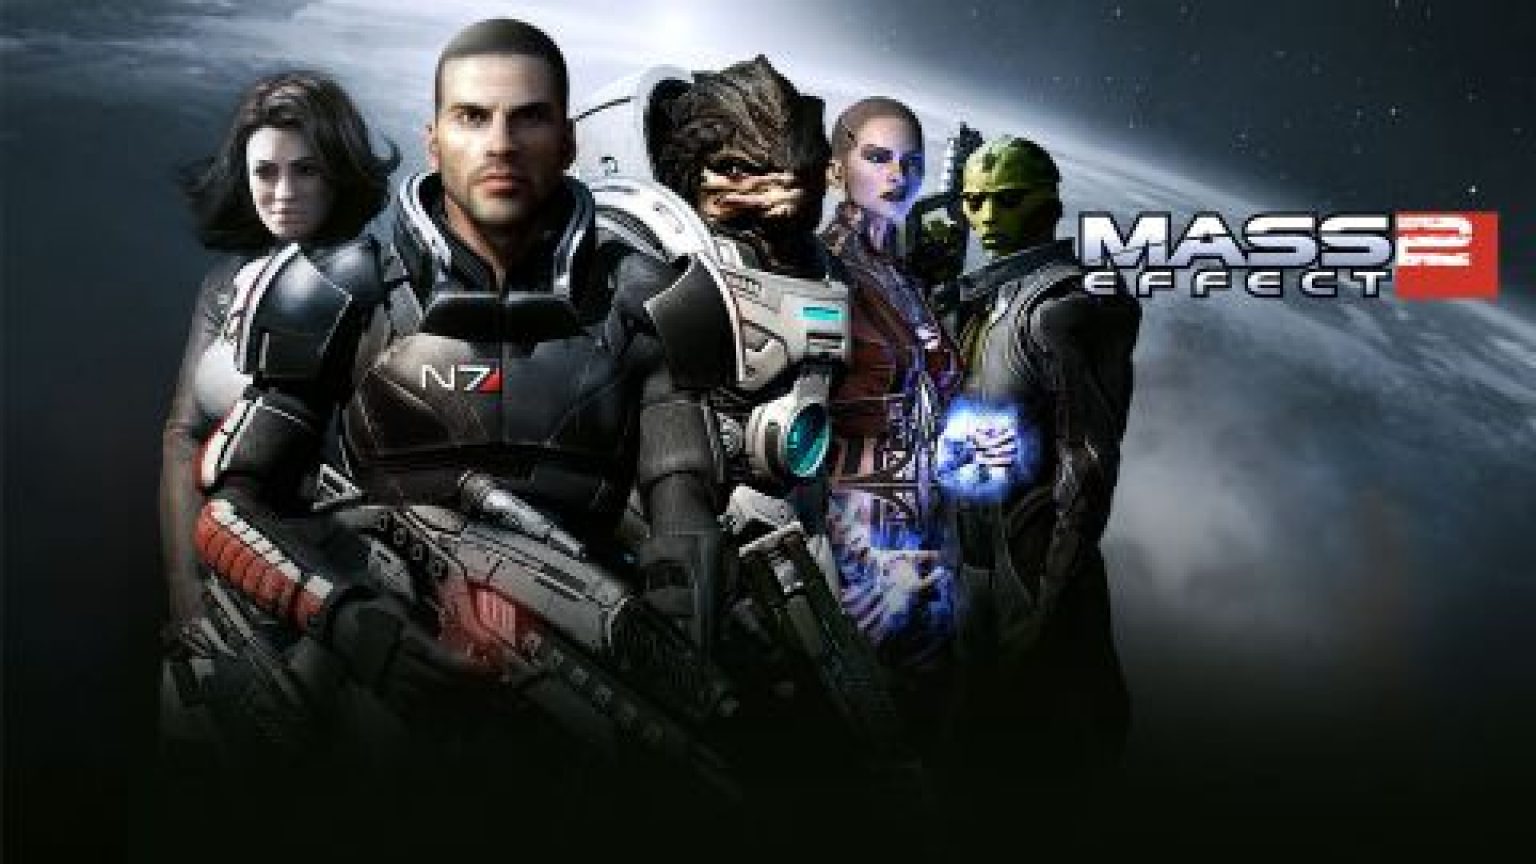 mass effect 2 download pc free